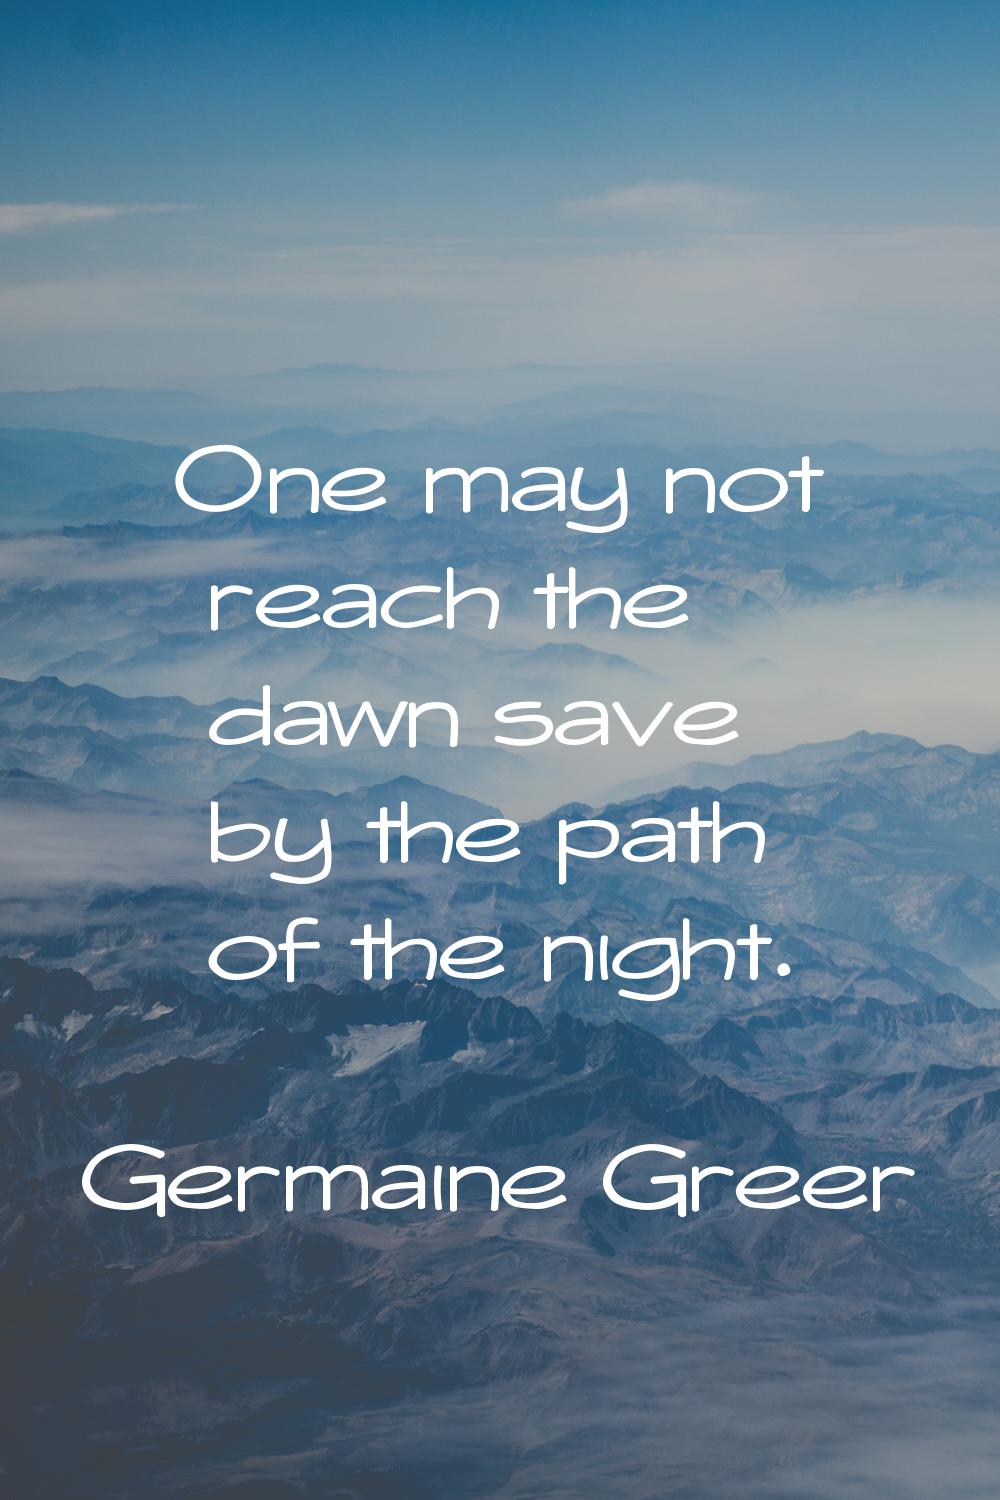 One may not reach the dawn save by the path of the night.